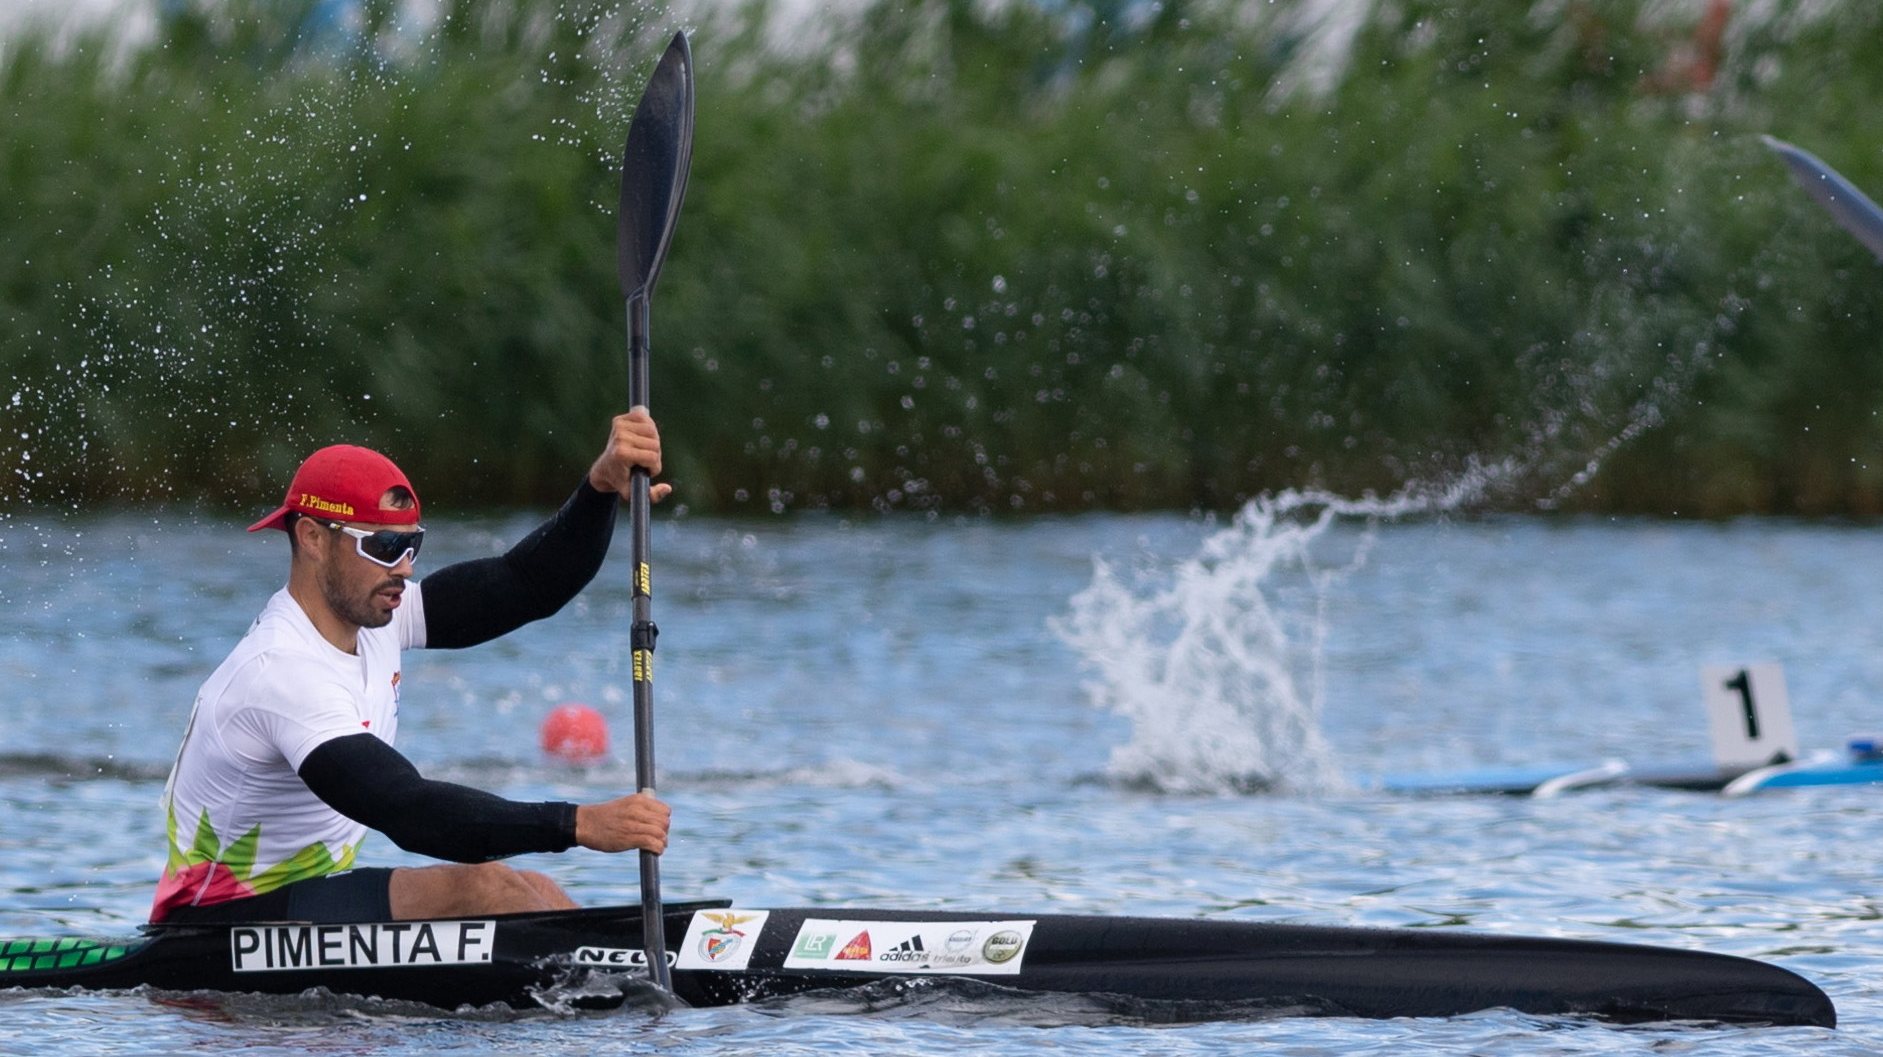 epa09983896 Fernando Pimenta of Portugal competes in a heat of the men&#039;s K1 1000m final race at the ICF Kayak and Canoe World Cup event in Poznan, Poland, 29 May 2022.  EPA/Jakub Kaczmarczyk POLAND OUT